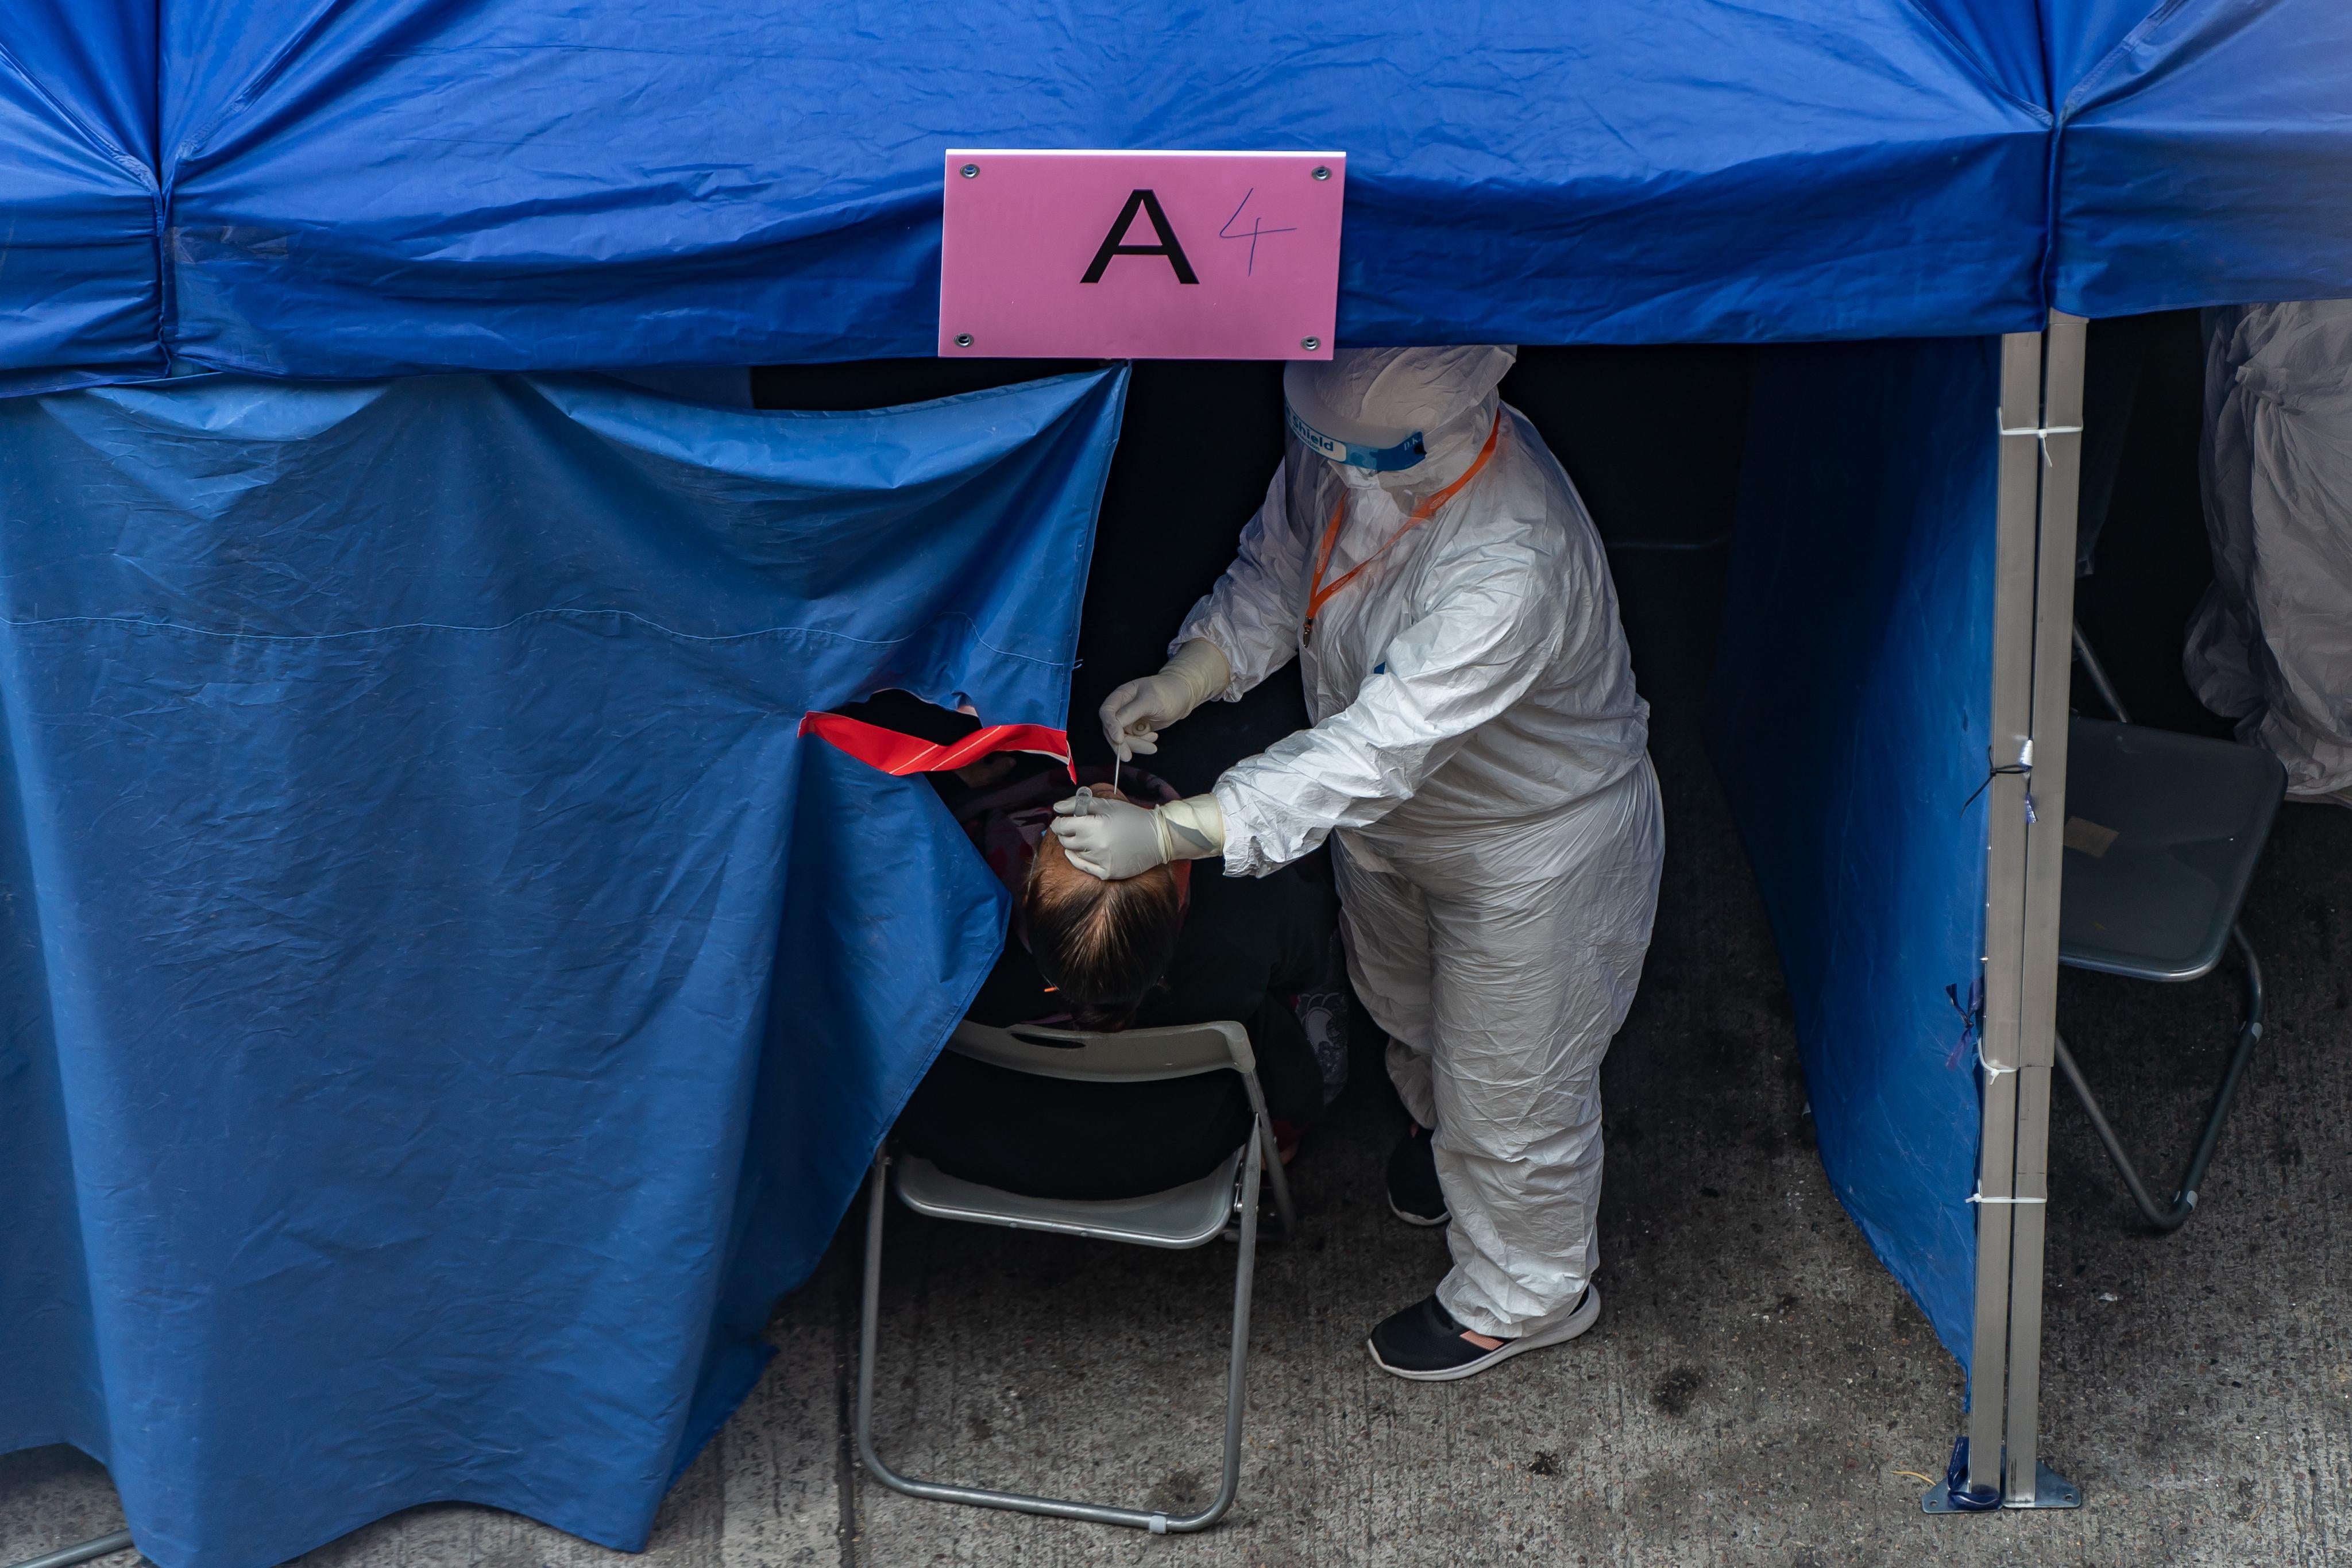 A health worker in full protective gear administers a coronavirus swab in a patient’s nose in a makeshift tent.